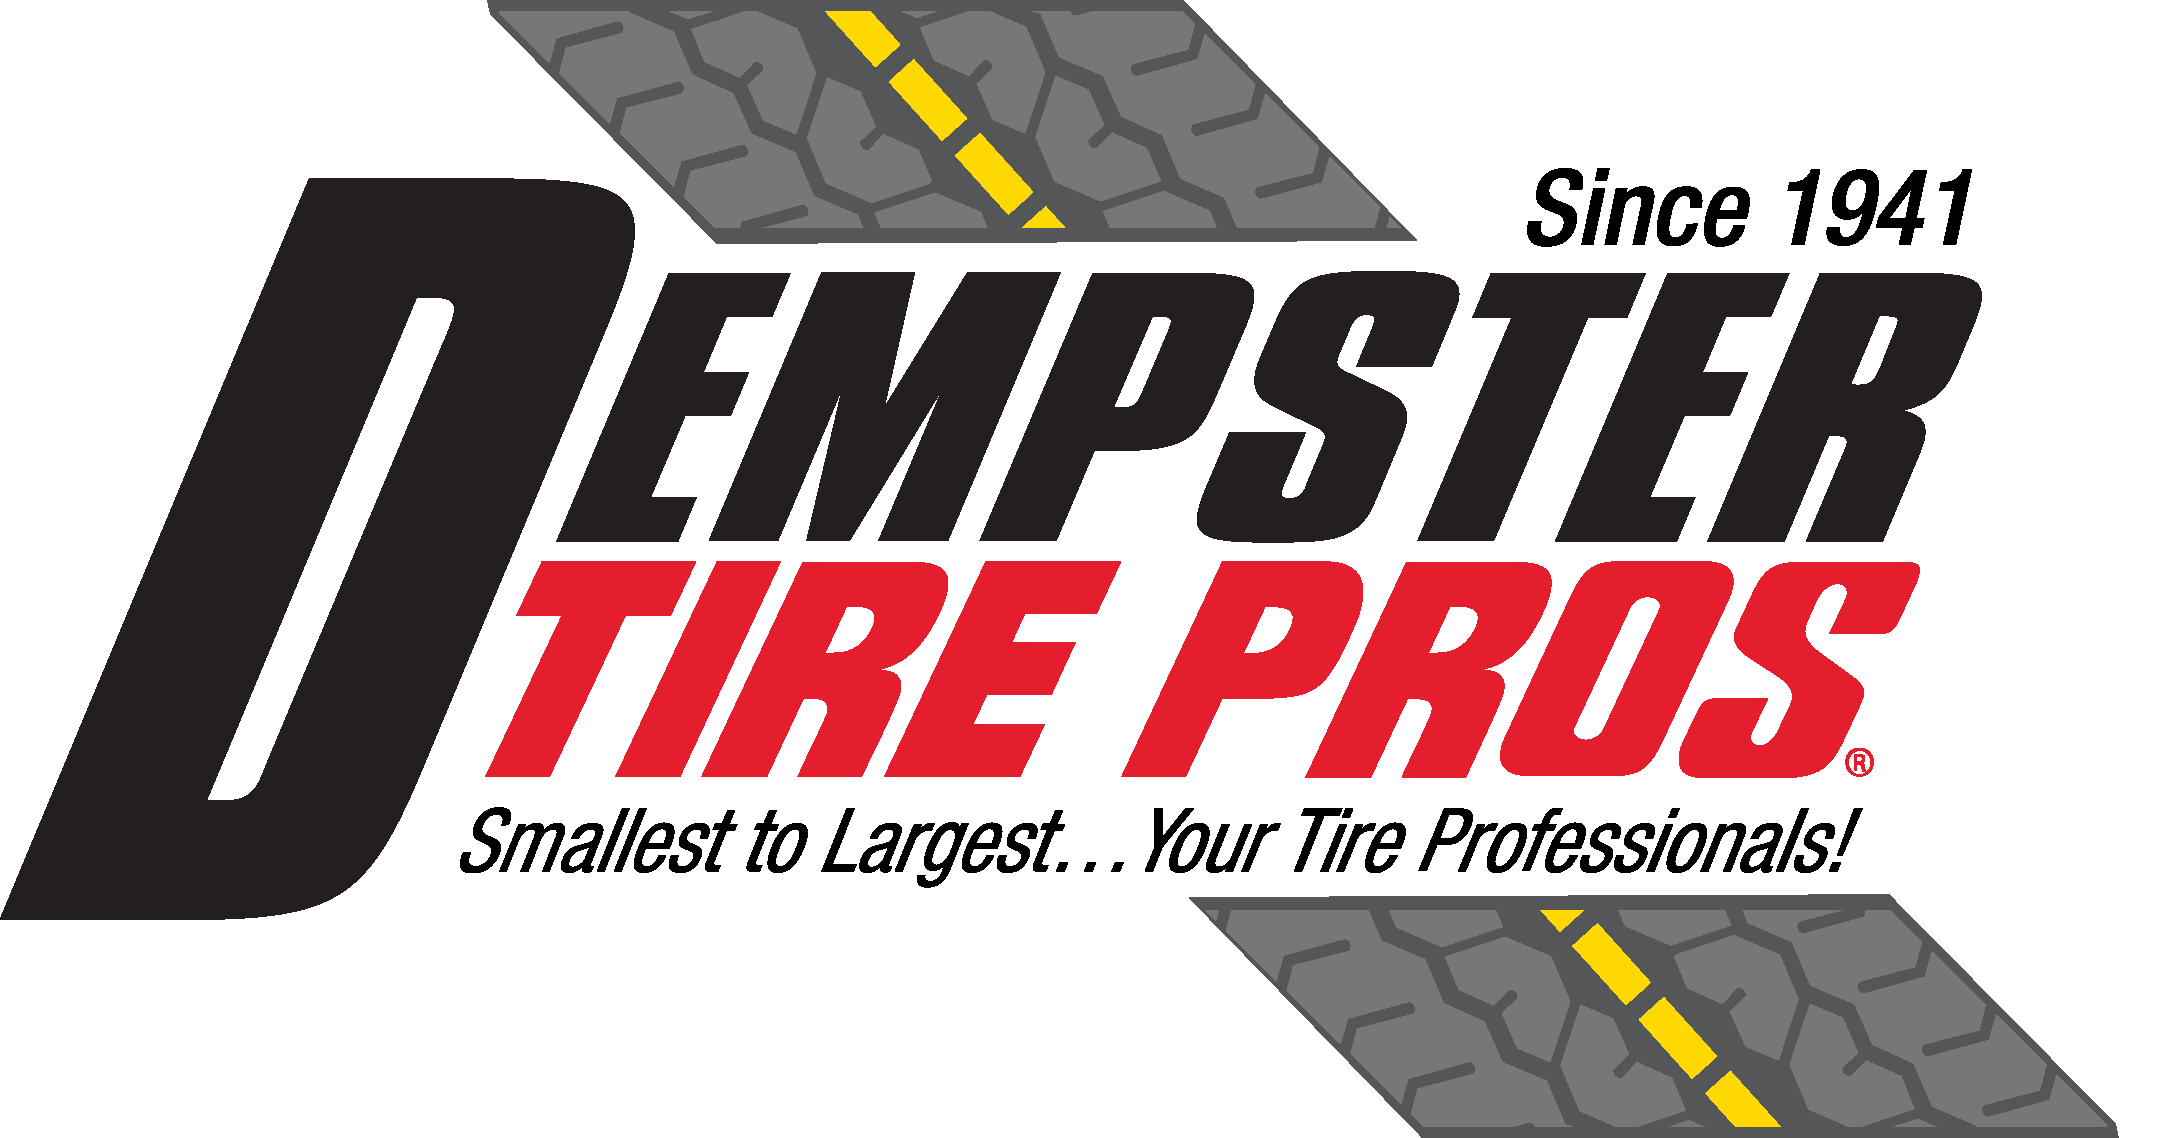 WWelcome to Dempster Tire Pros in Middletown, OH 45042